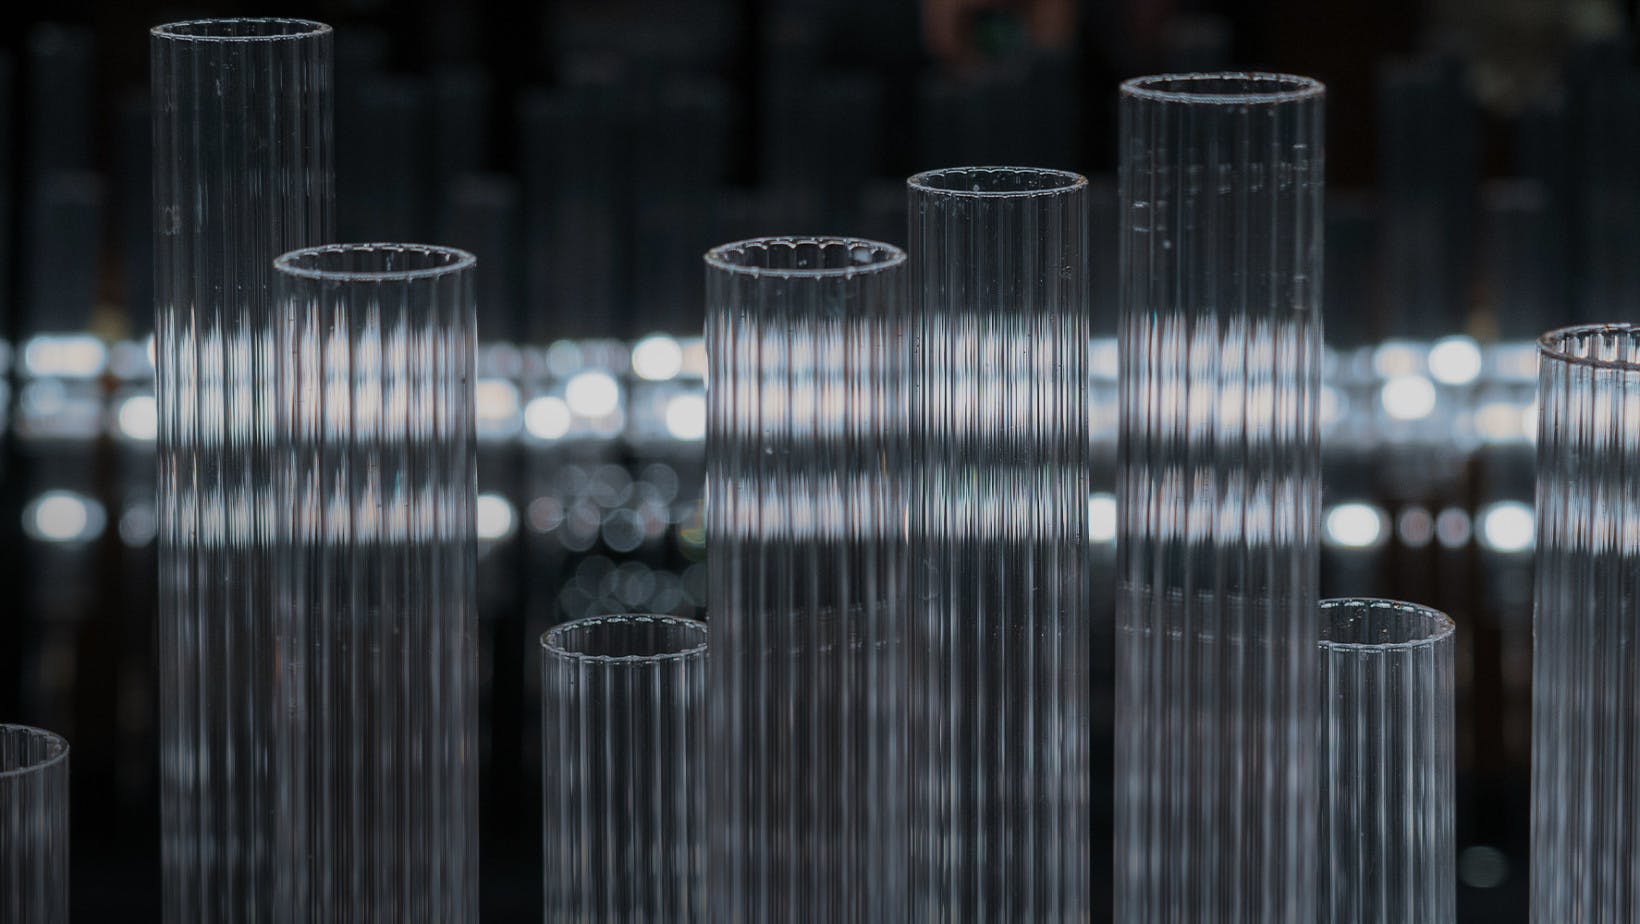 Glass tubes of varying heights